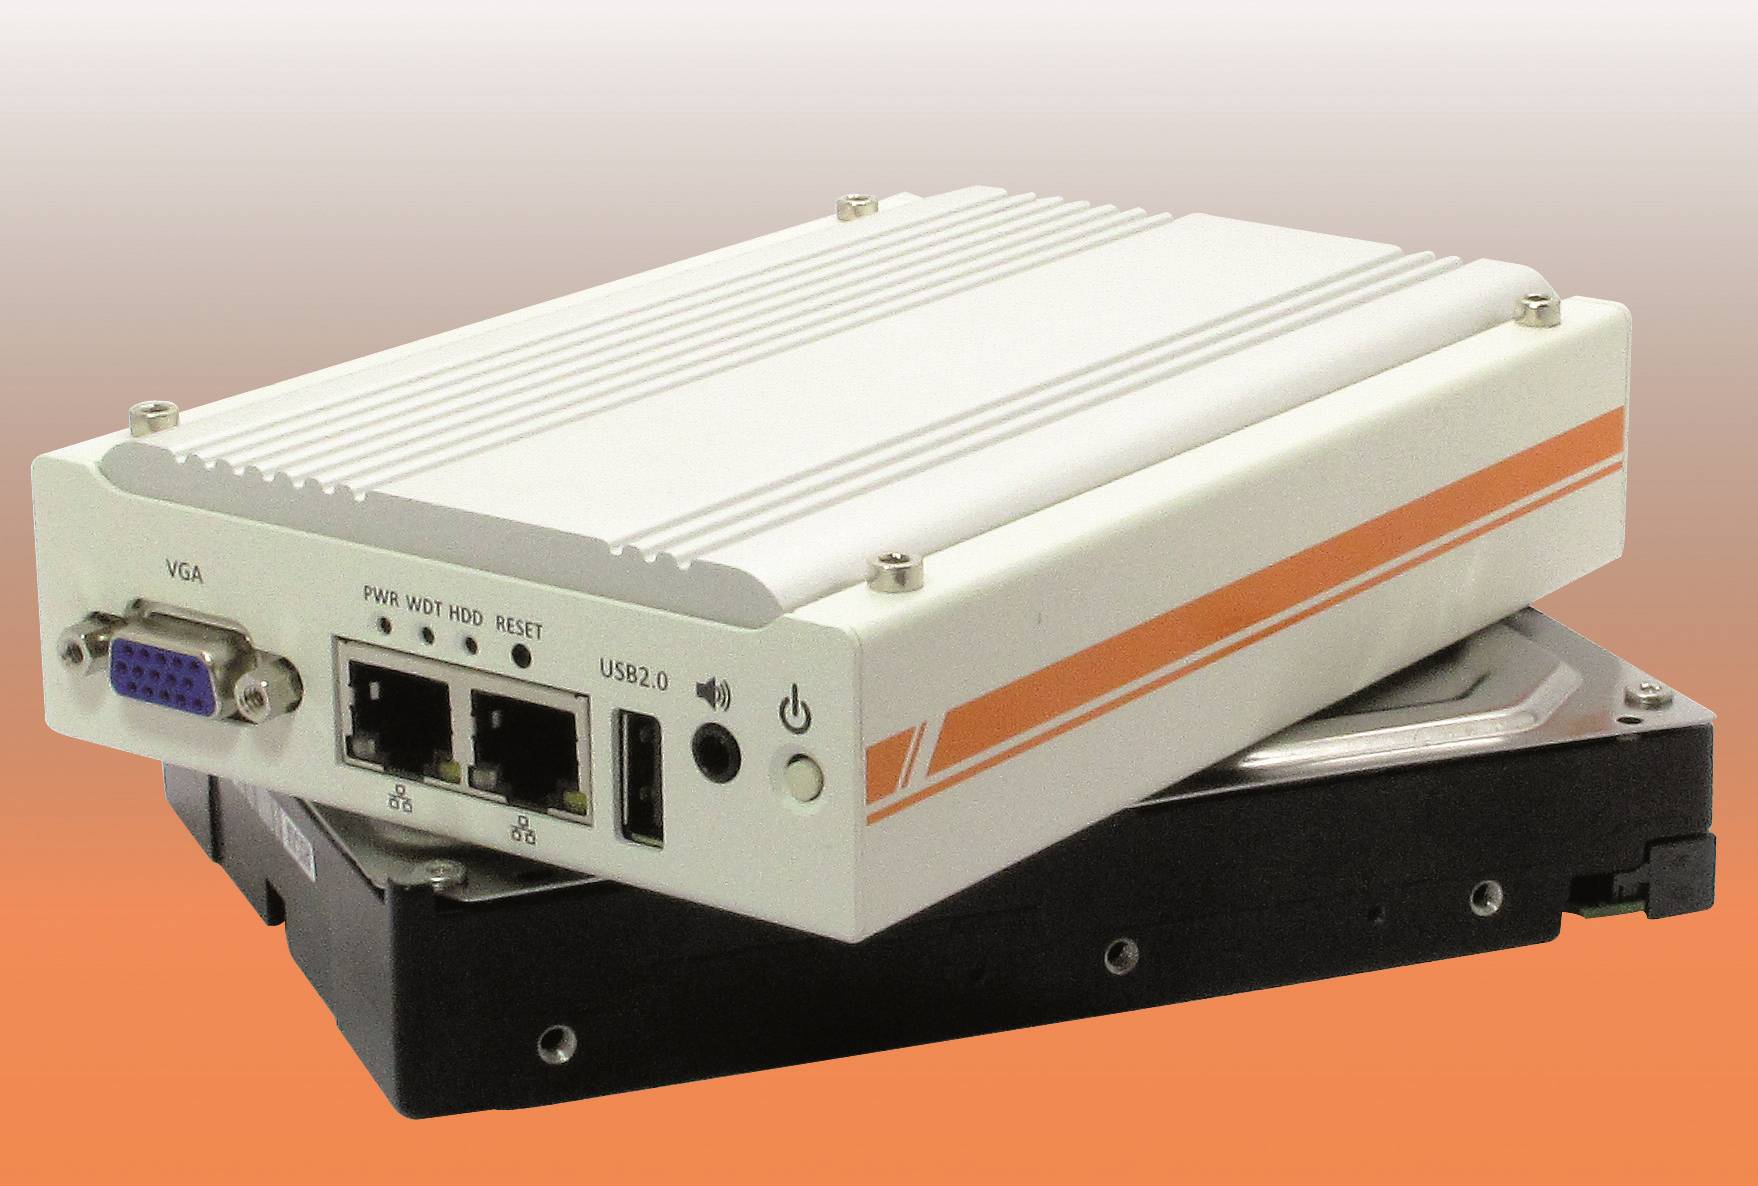 Fanless industrial controller features multiple high-speed interfaces